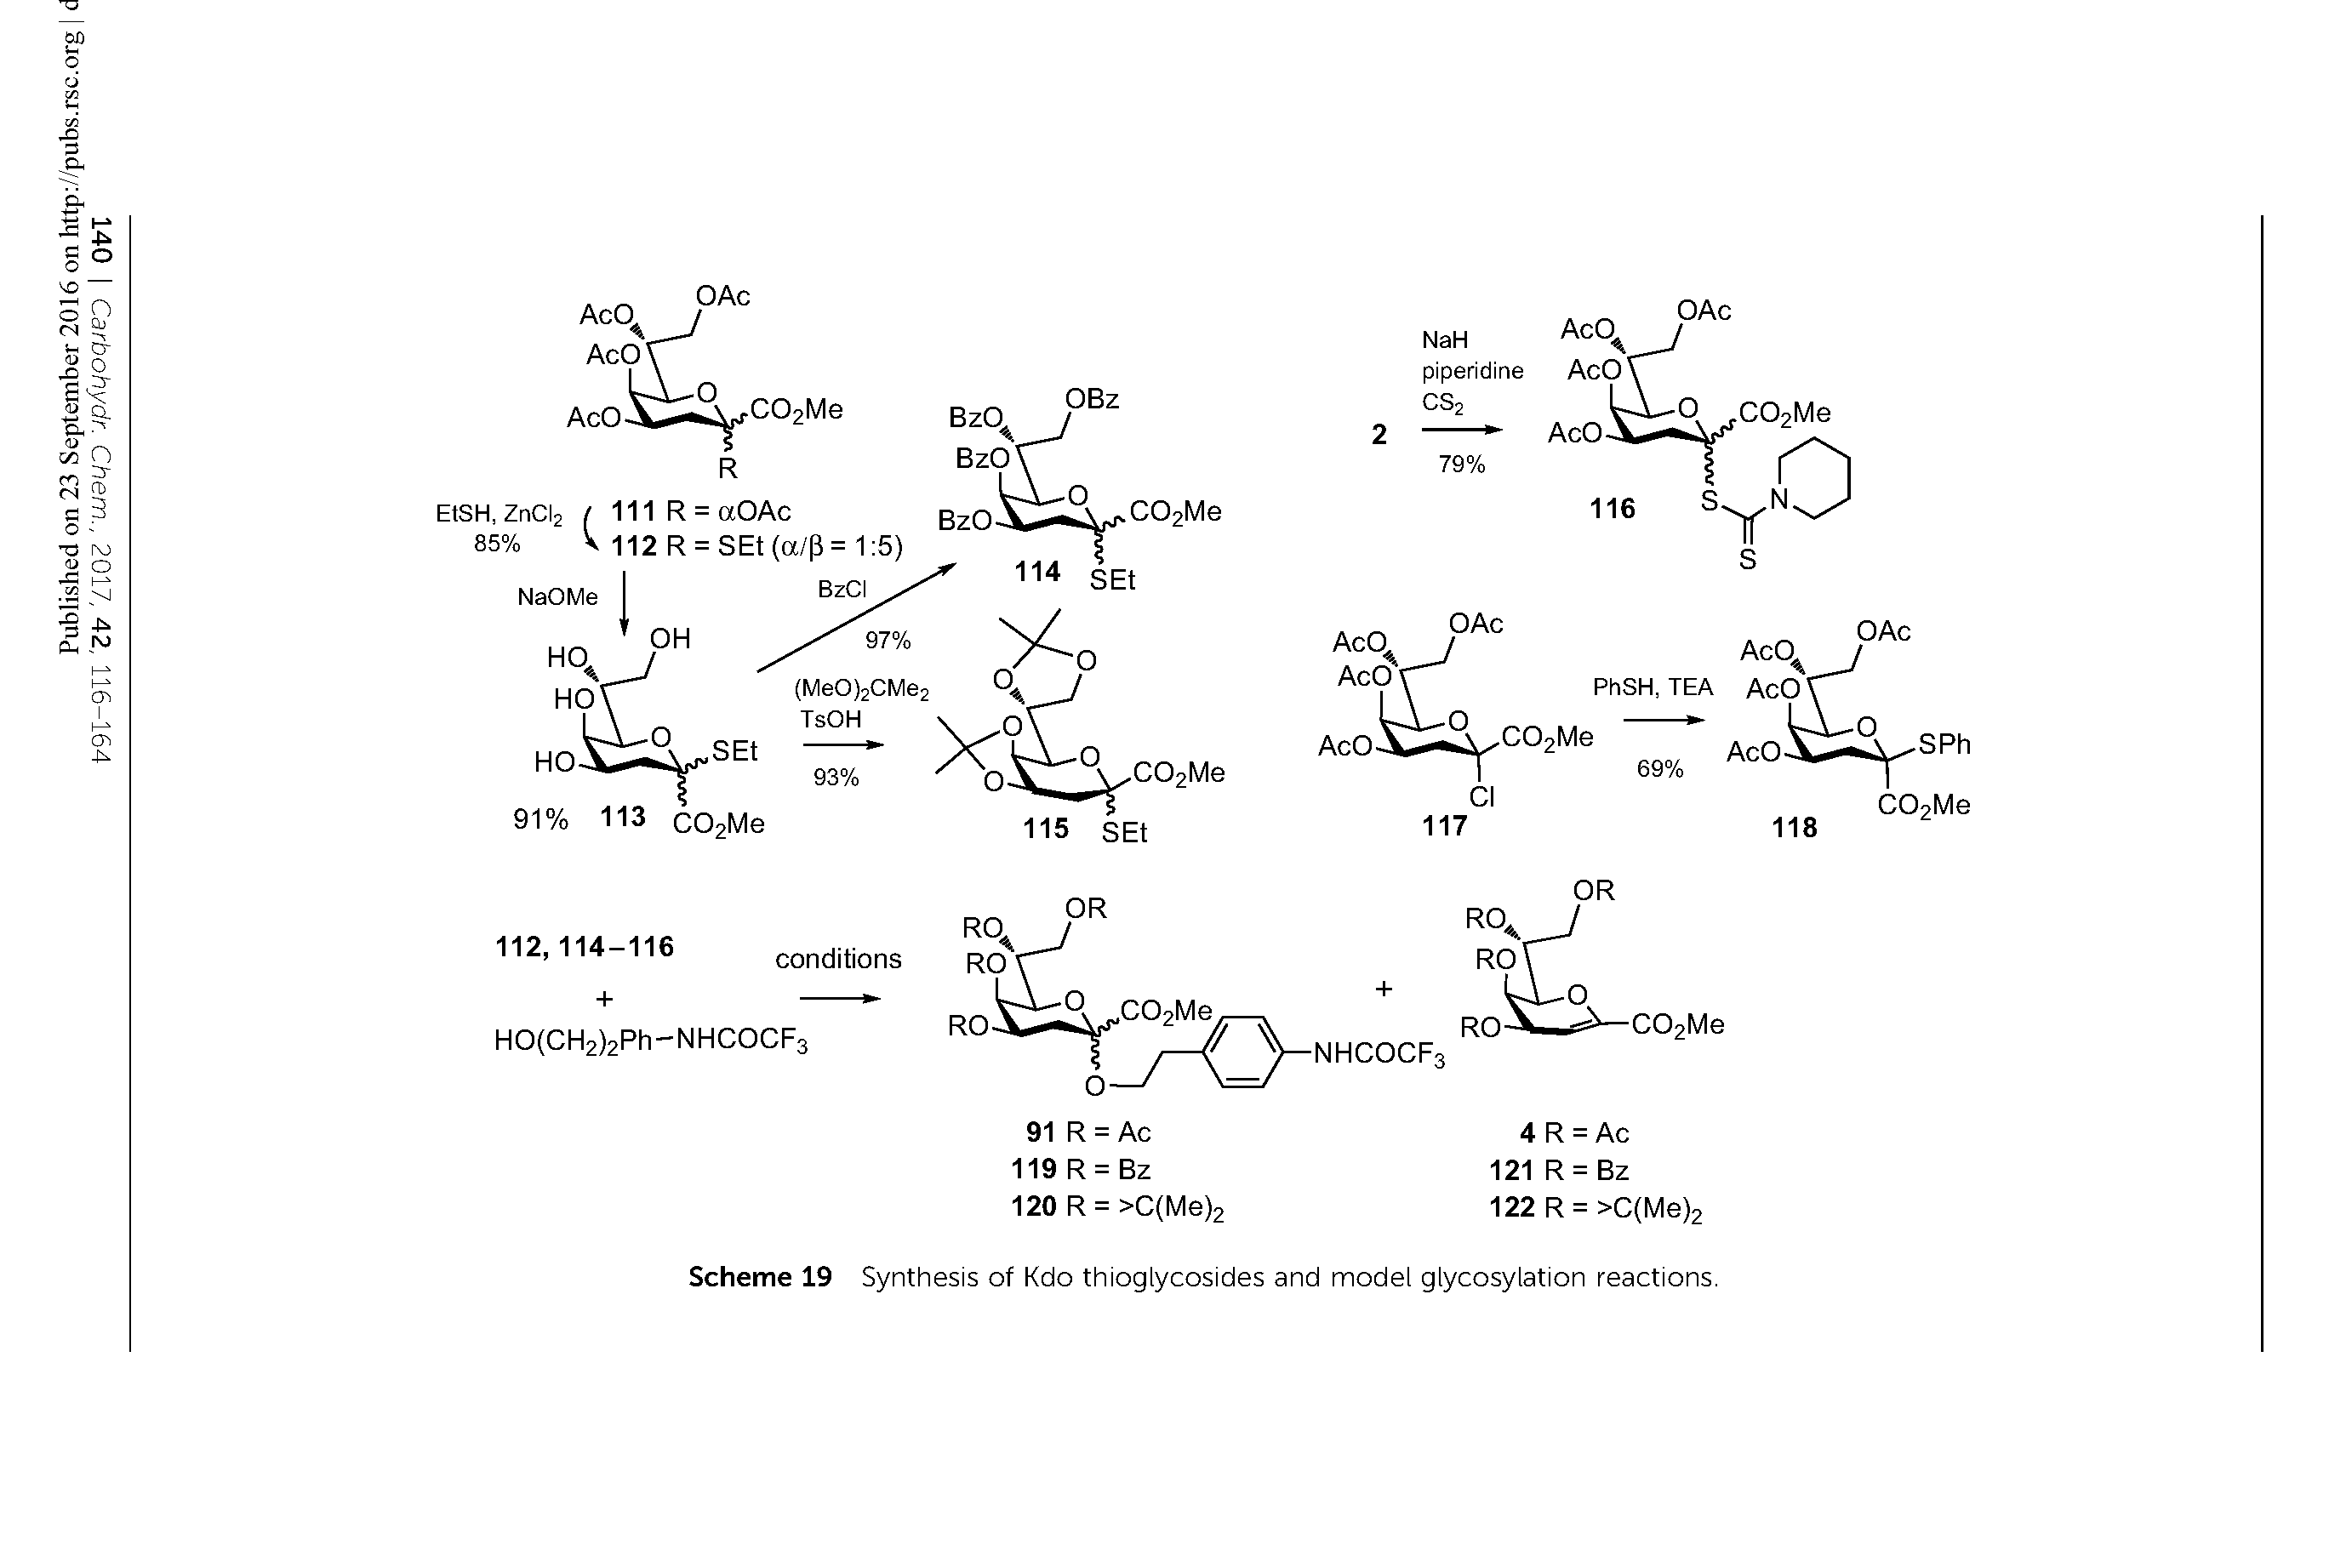 Scheme 19 Synthesis of Kdo thioglycosides and model glycosylation reactions.